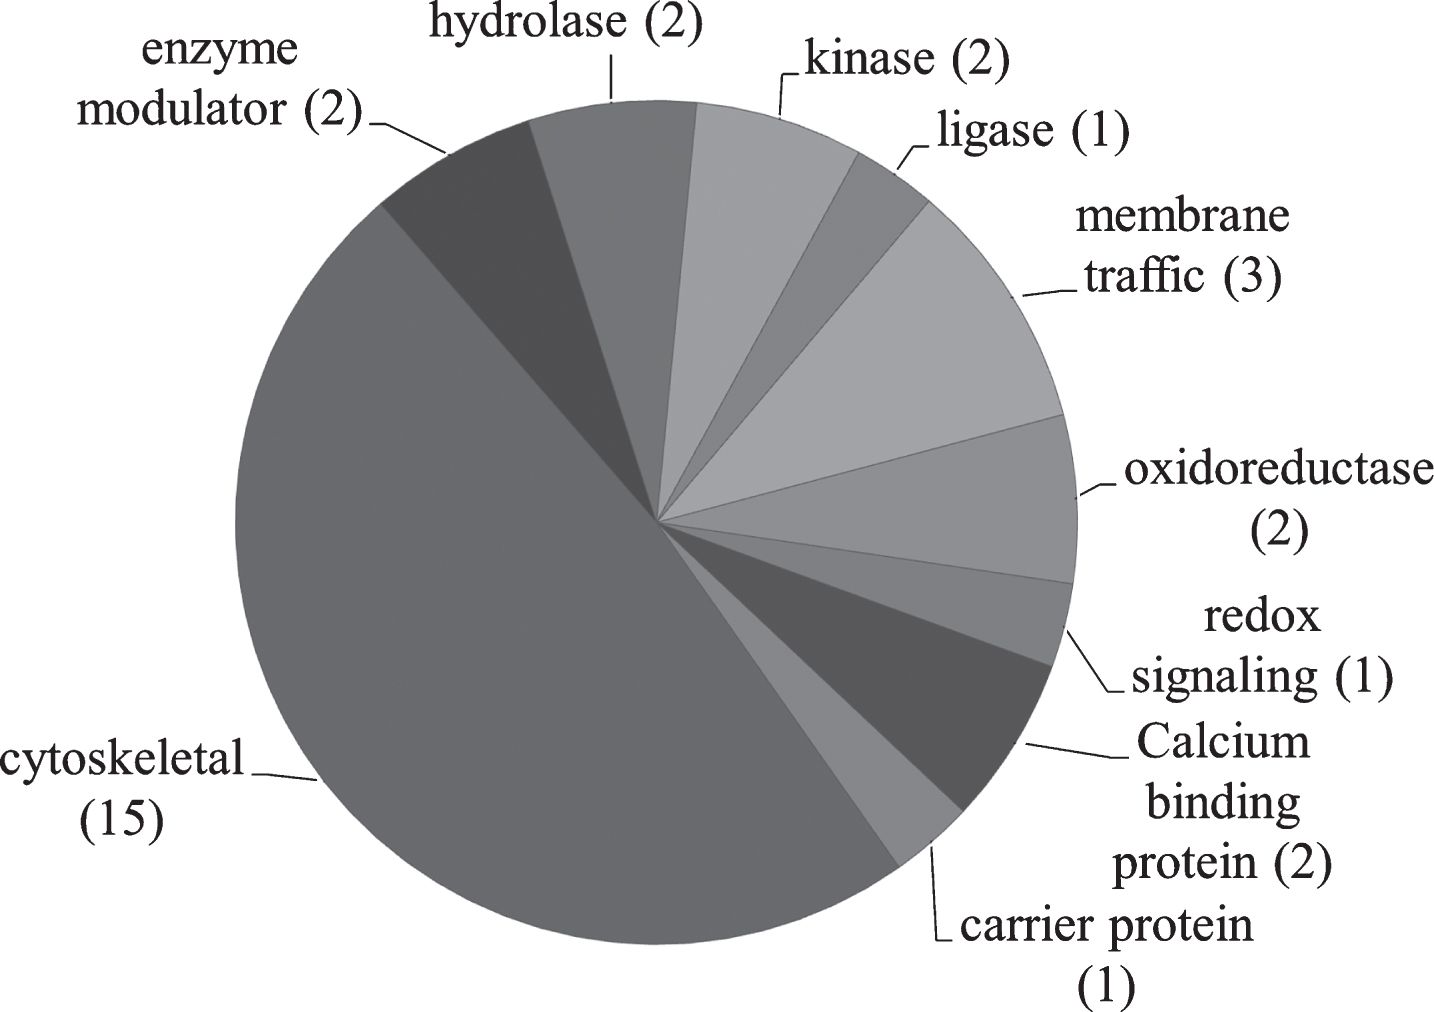 Pie chart representing the PANTHER classification of proteins based on protein class. The number of proteins in each category is shown in parenthesis.